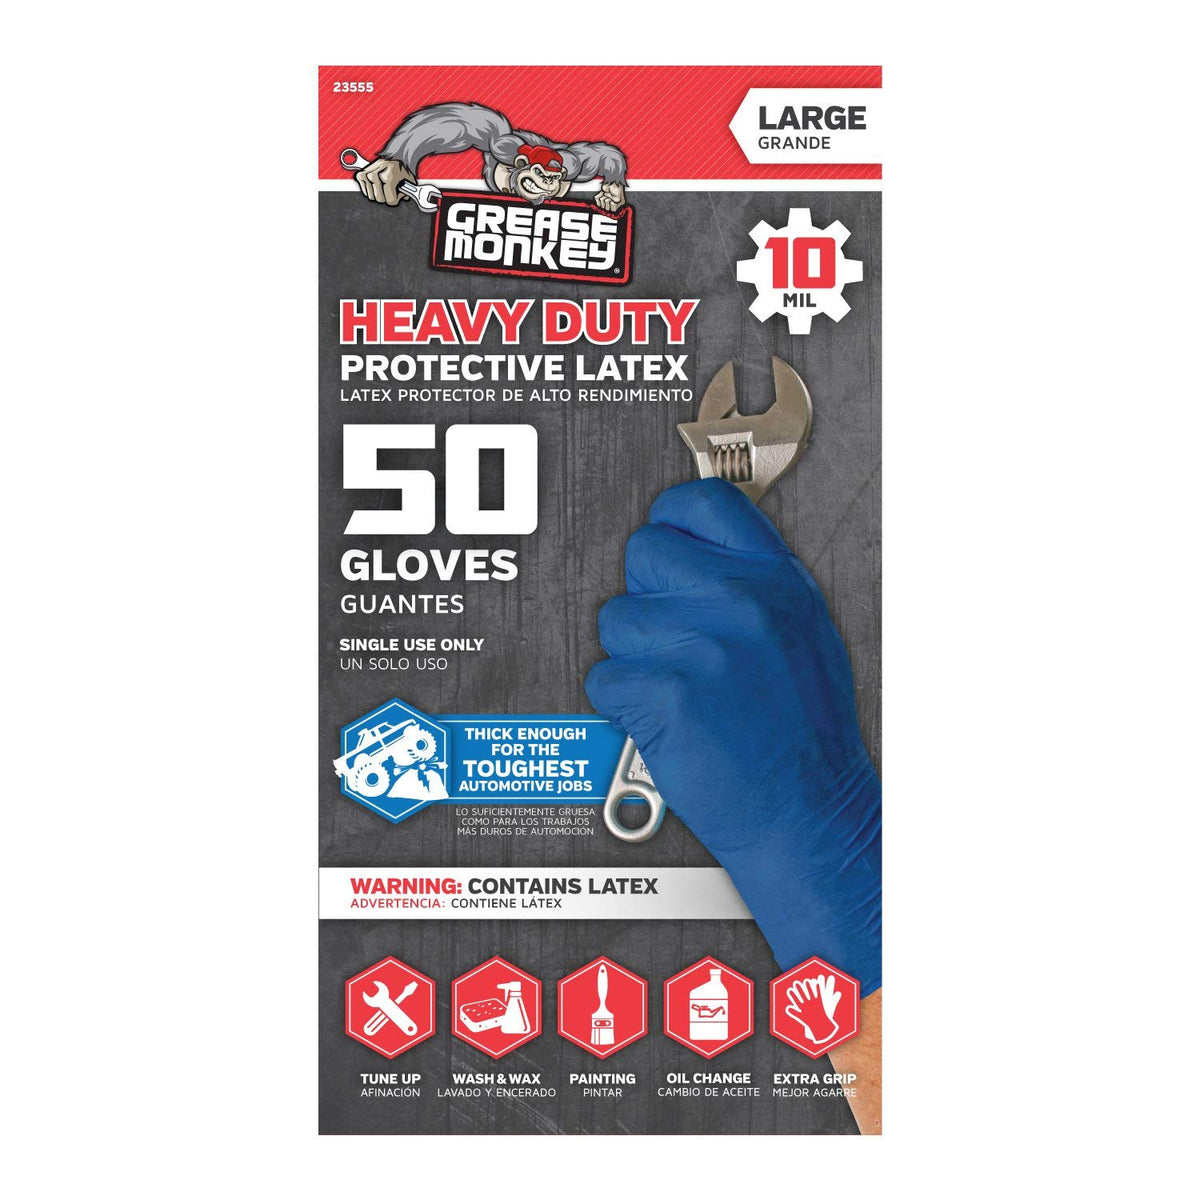 Grease Monkey 23555-110 Men's Heavy-Duty Fits All Latex Gloves, Blue, 50-Count